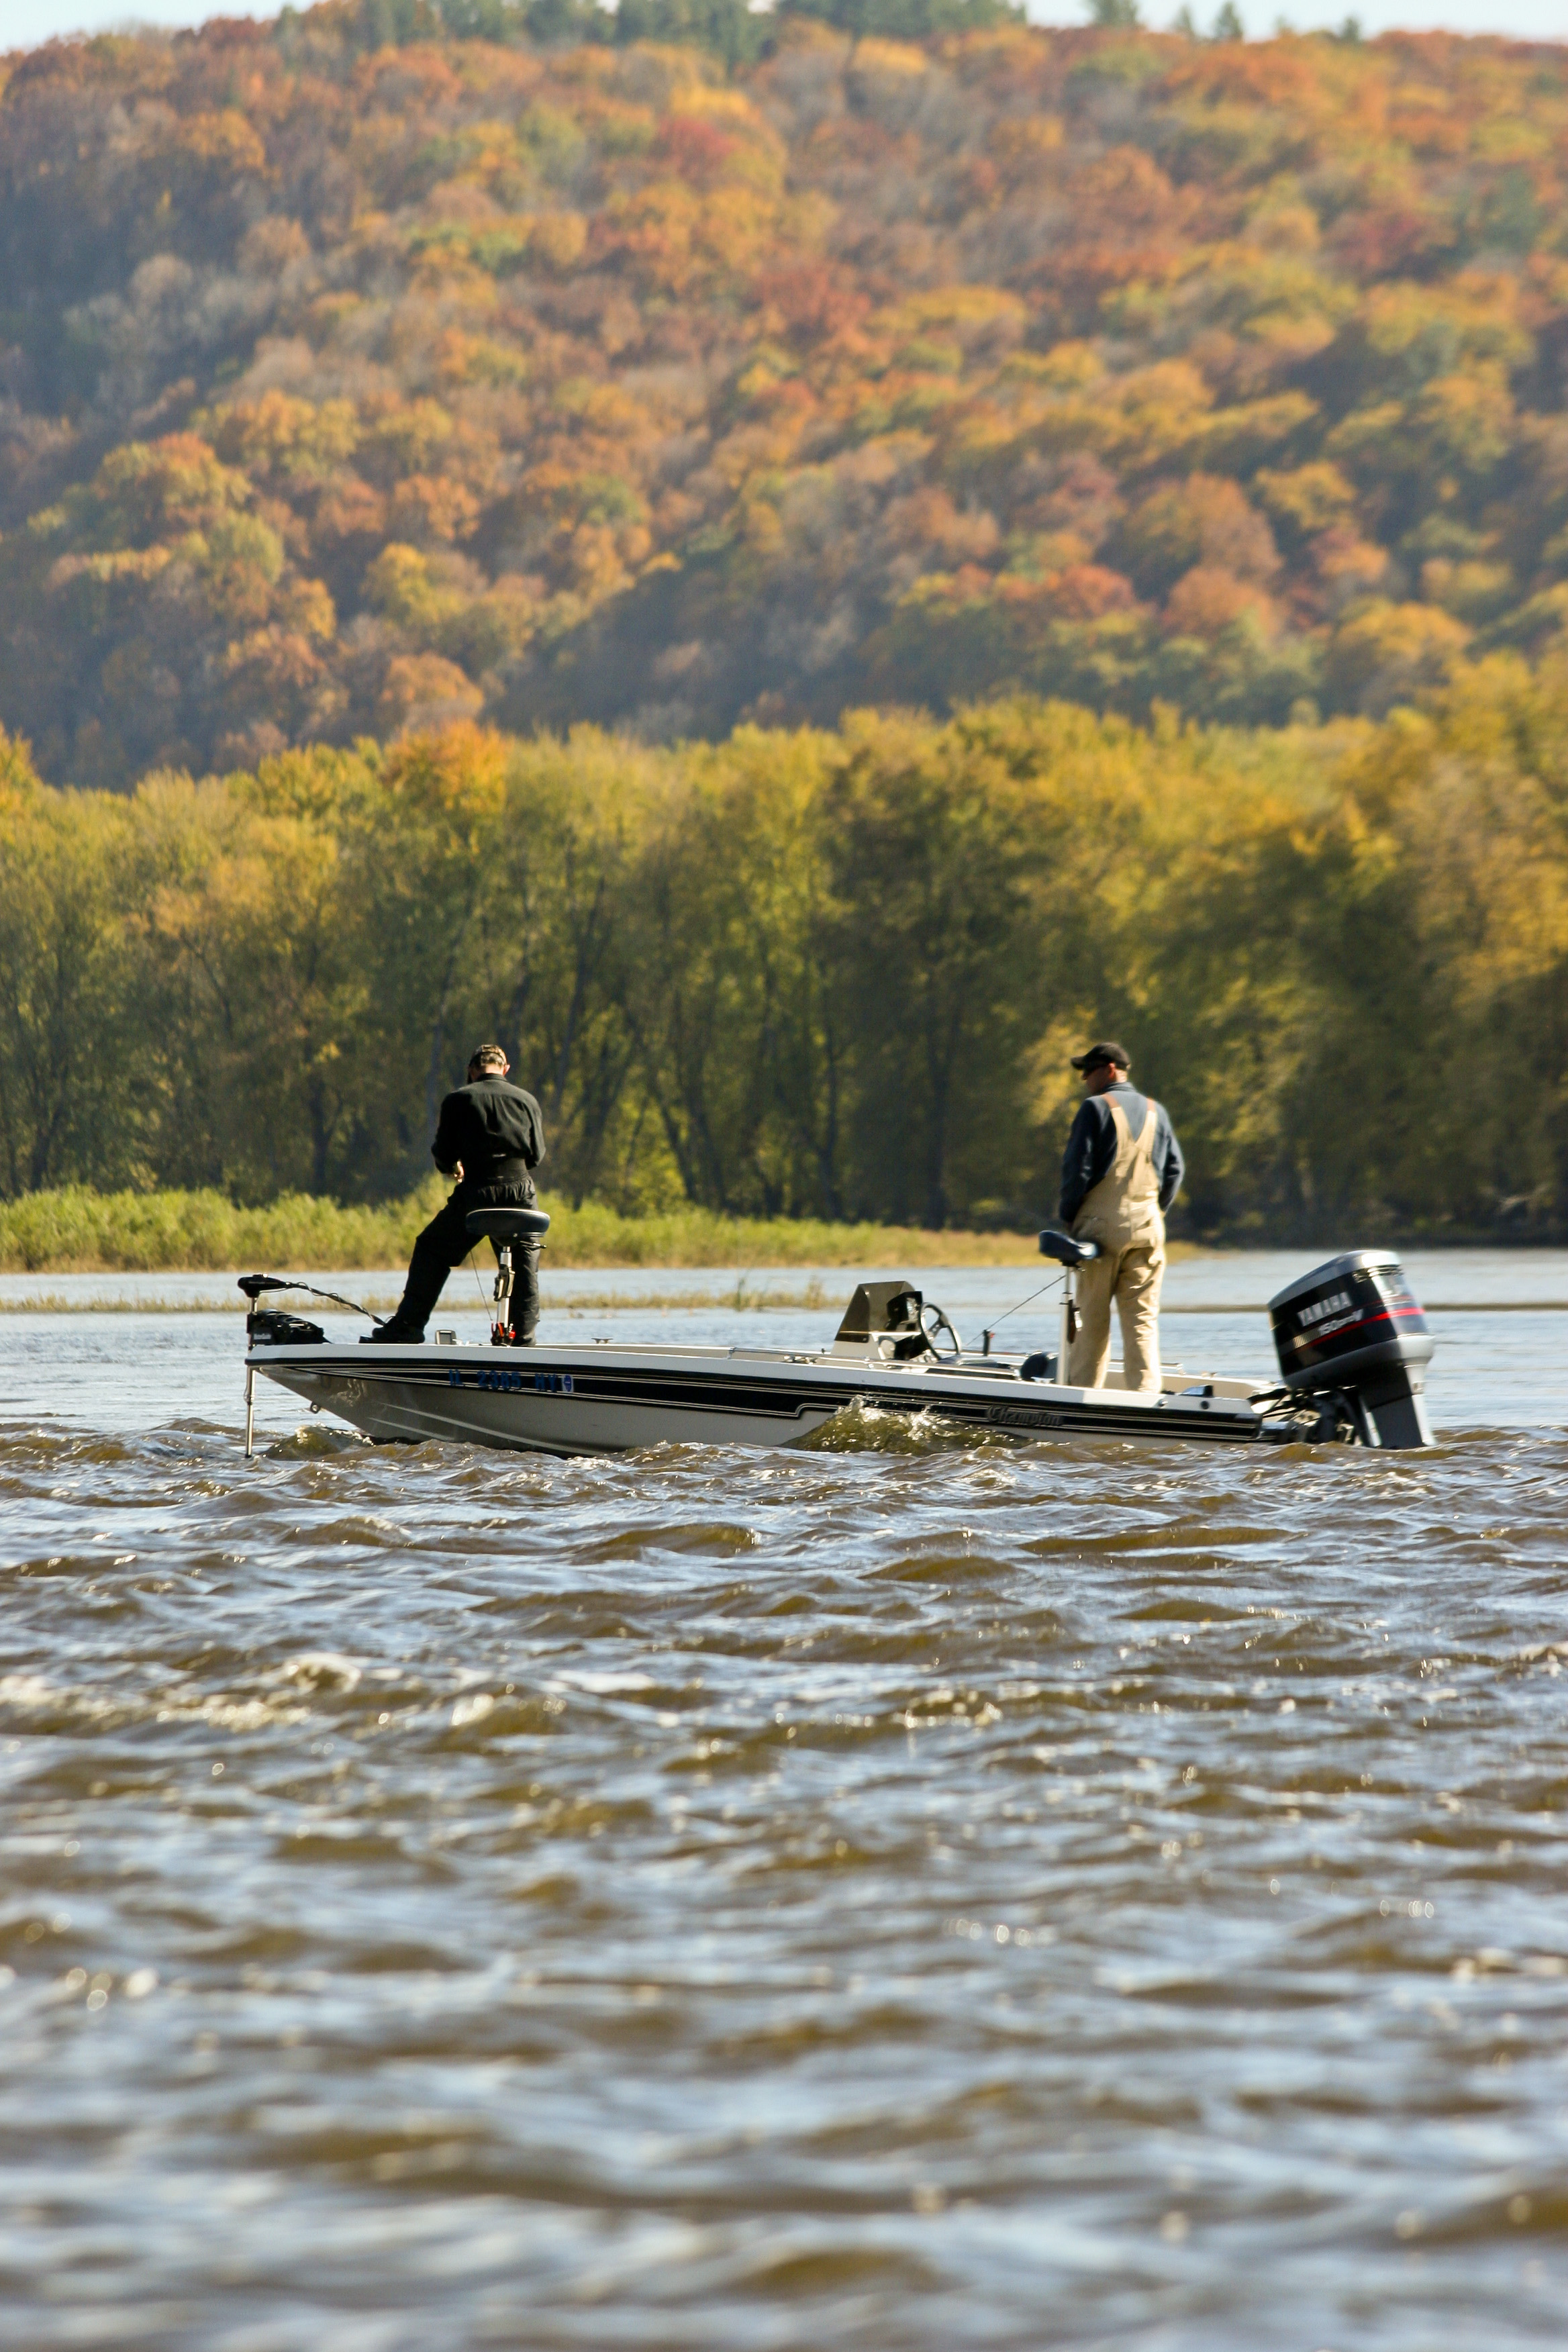 Out of the way fall color and 5 fantastic fall fishing spots | Iowa Outdoors